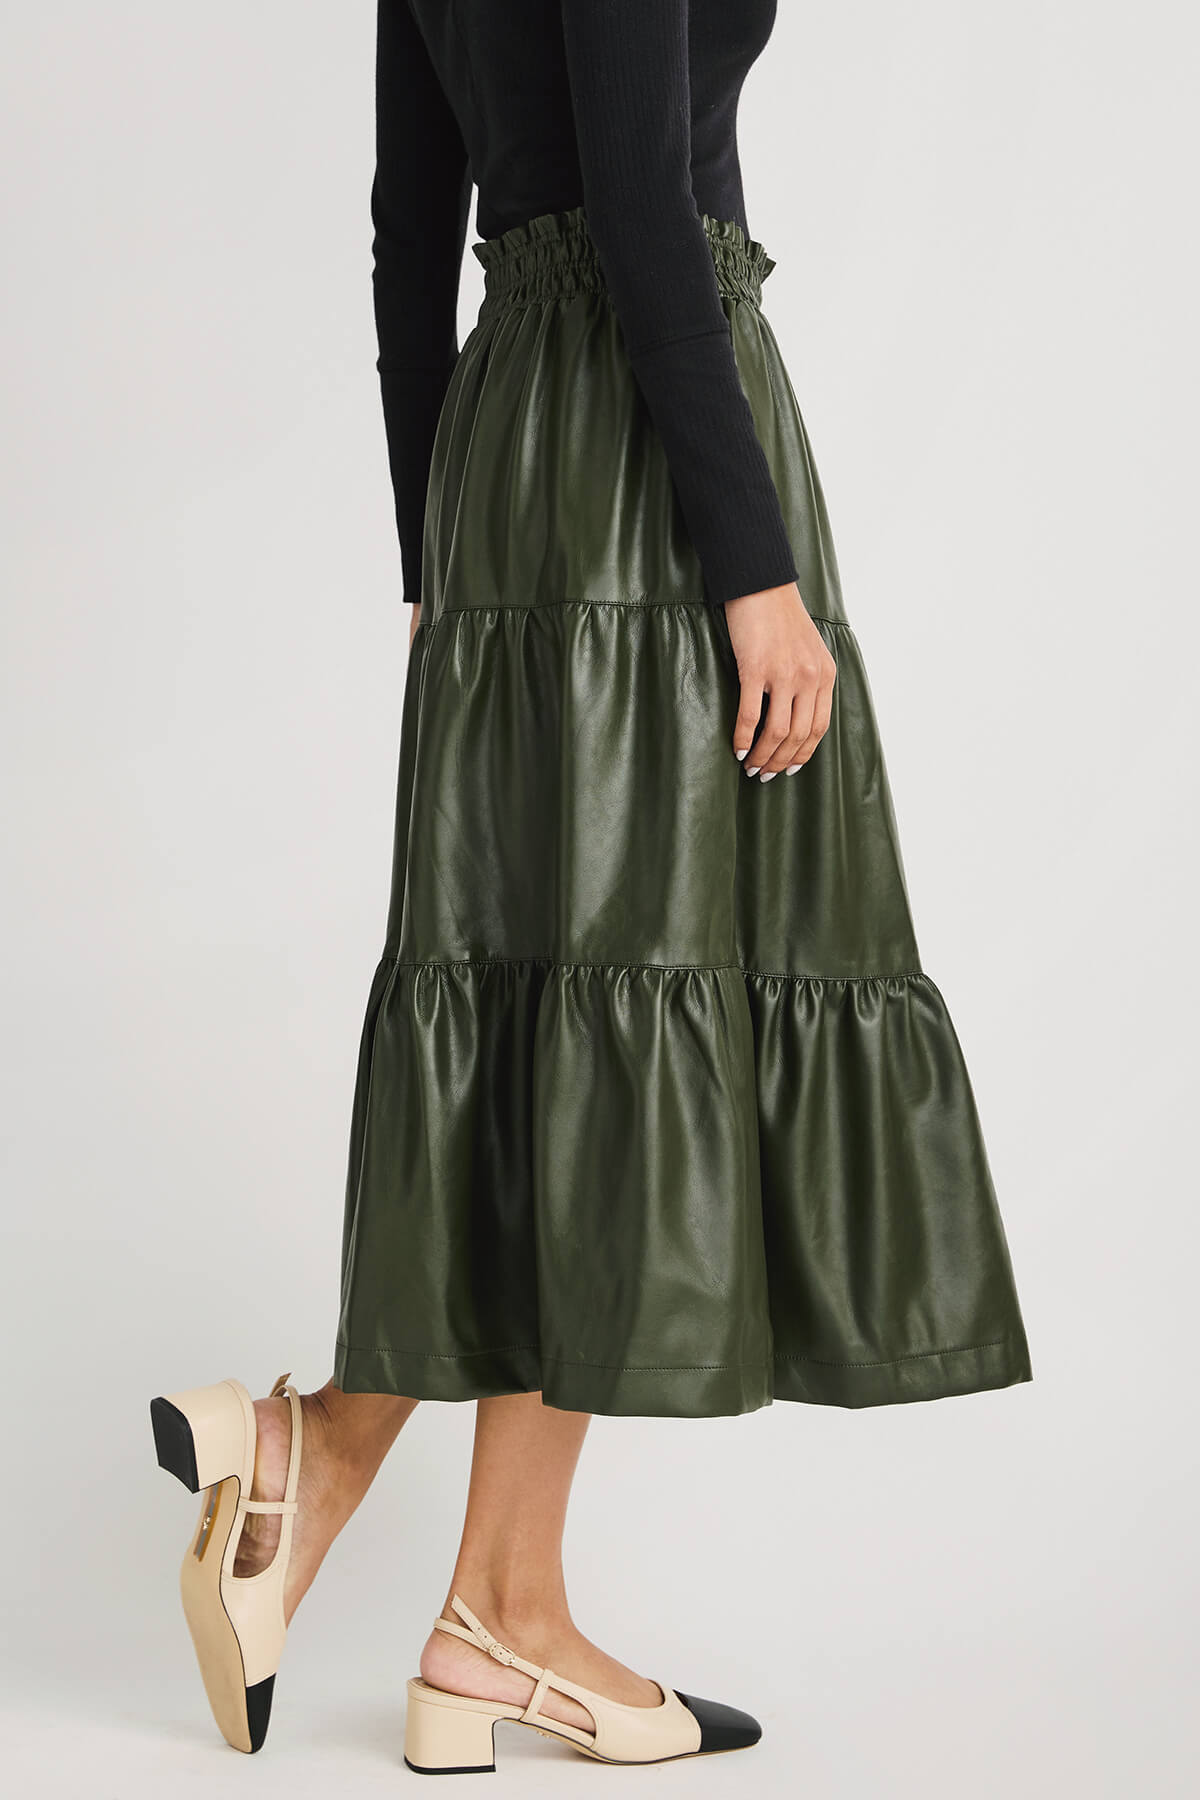 Fate Faux Leather Tiered Skirt